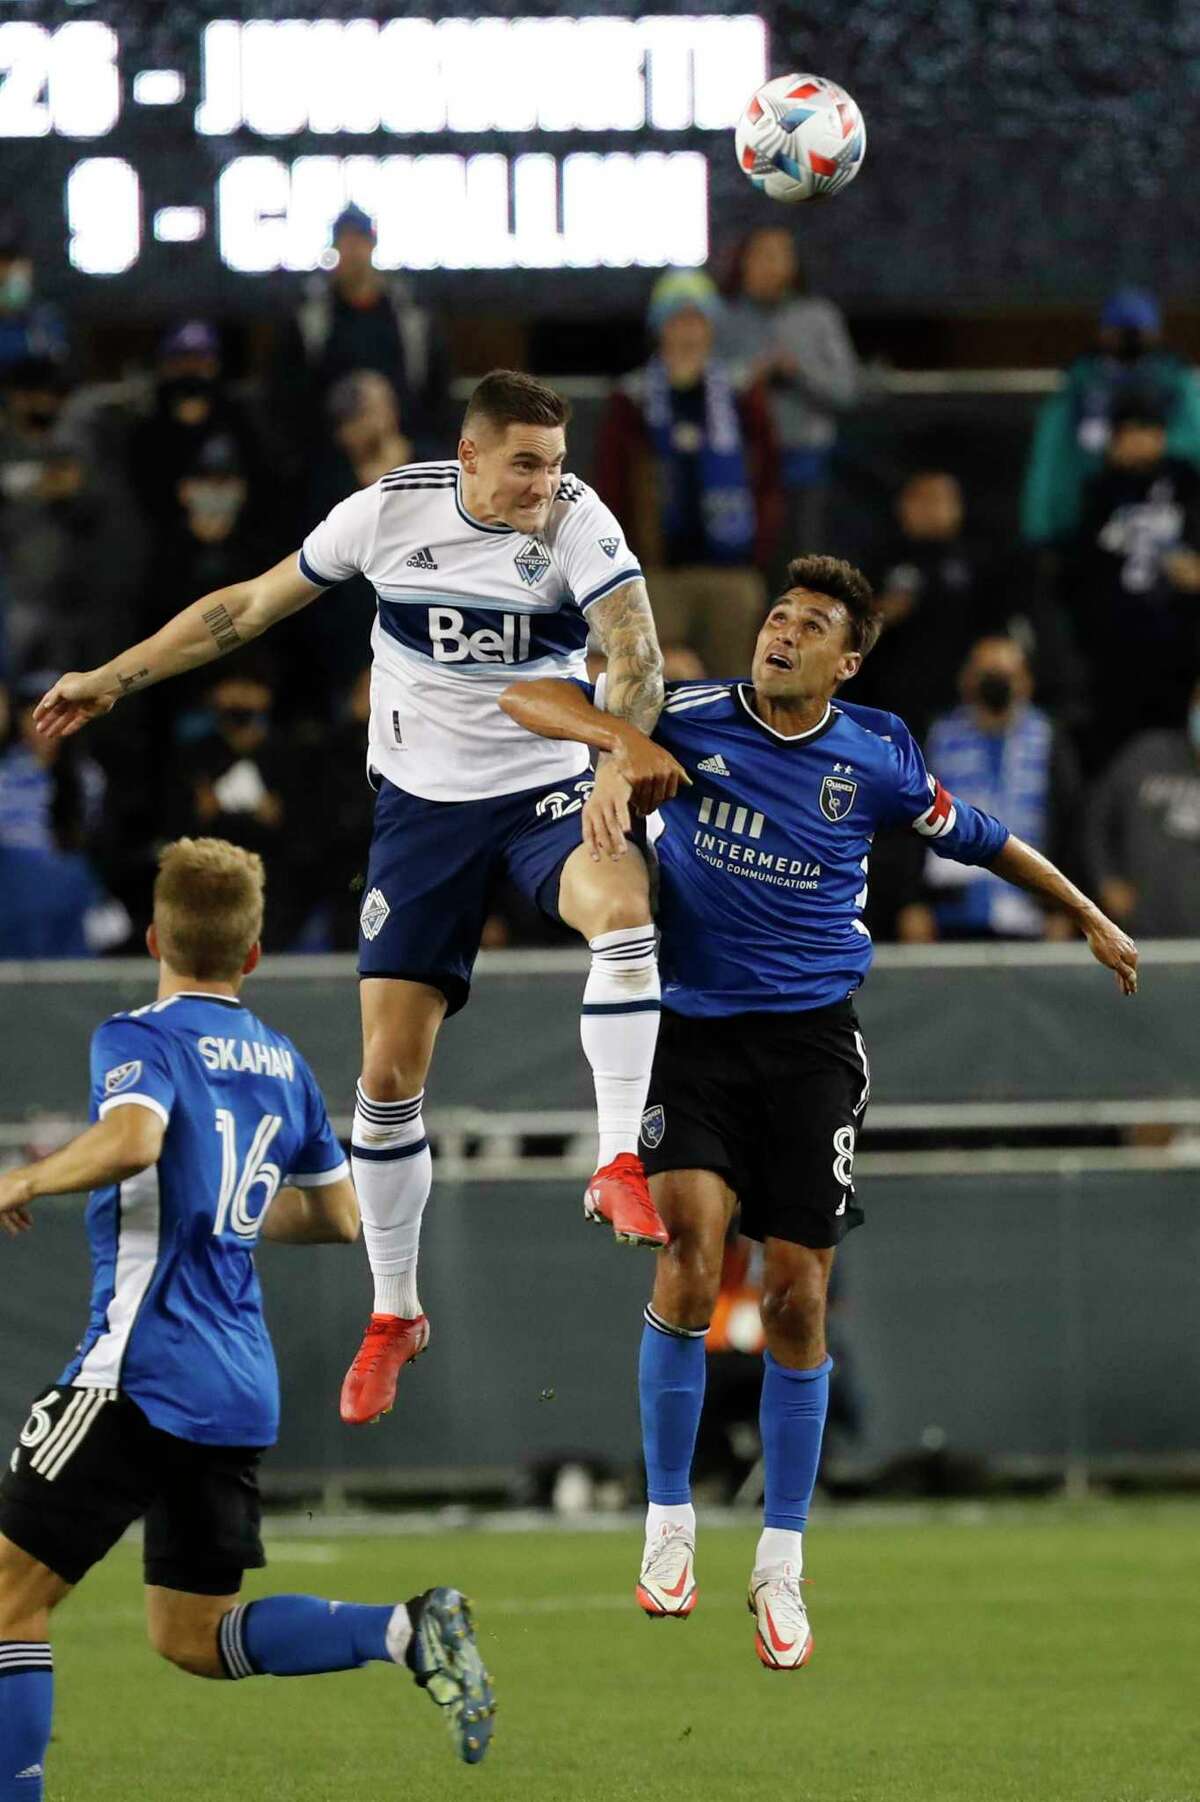 Vancouver Whitecaps defender Jake Nerwinski (28) goes up for a header against San Jose Earthquakes forward Chris Wondolowski (8) during the second half of an MLS soccer match in San Jose, Calif., Saturday, Oct. 23, 2021. (AP Photo/Josie Lepe)